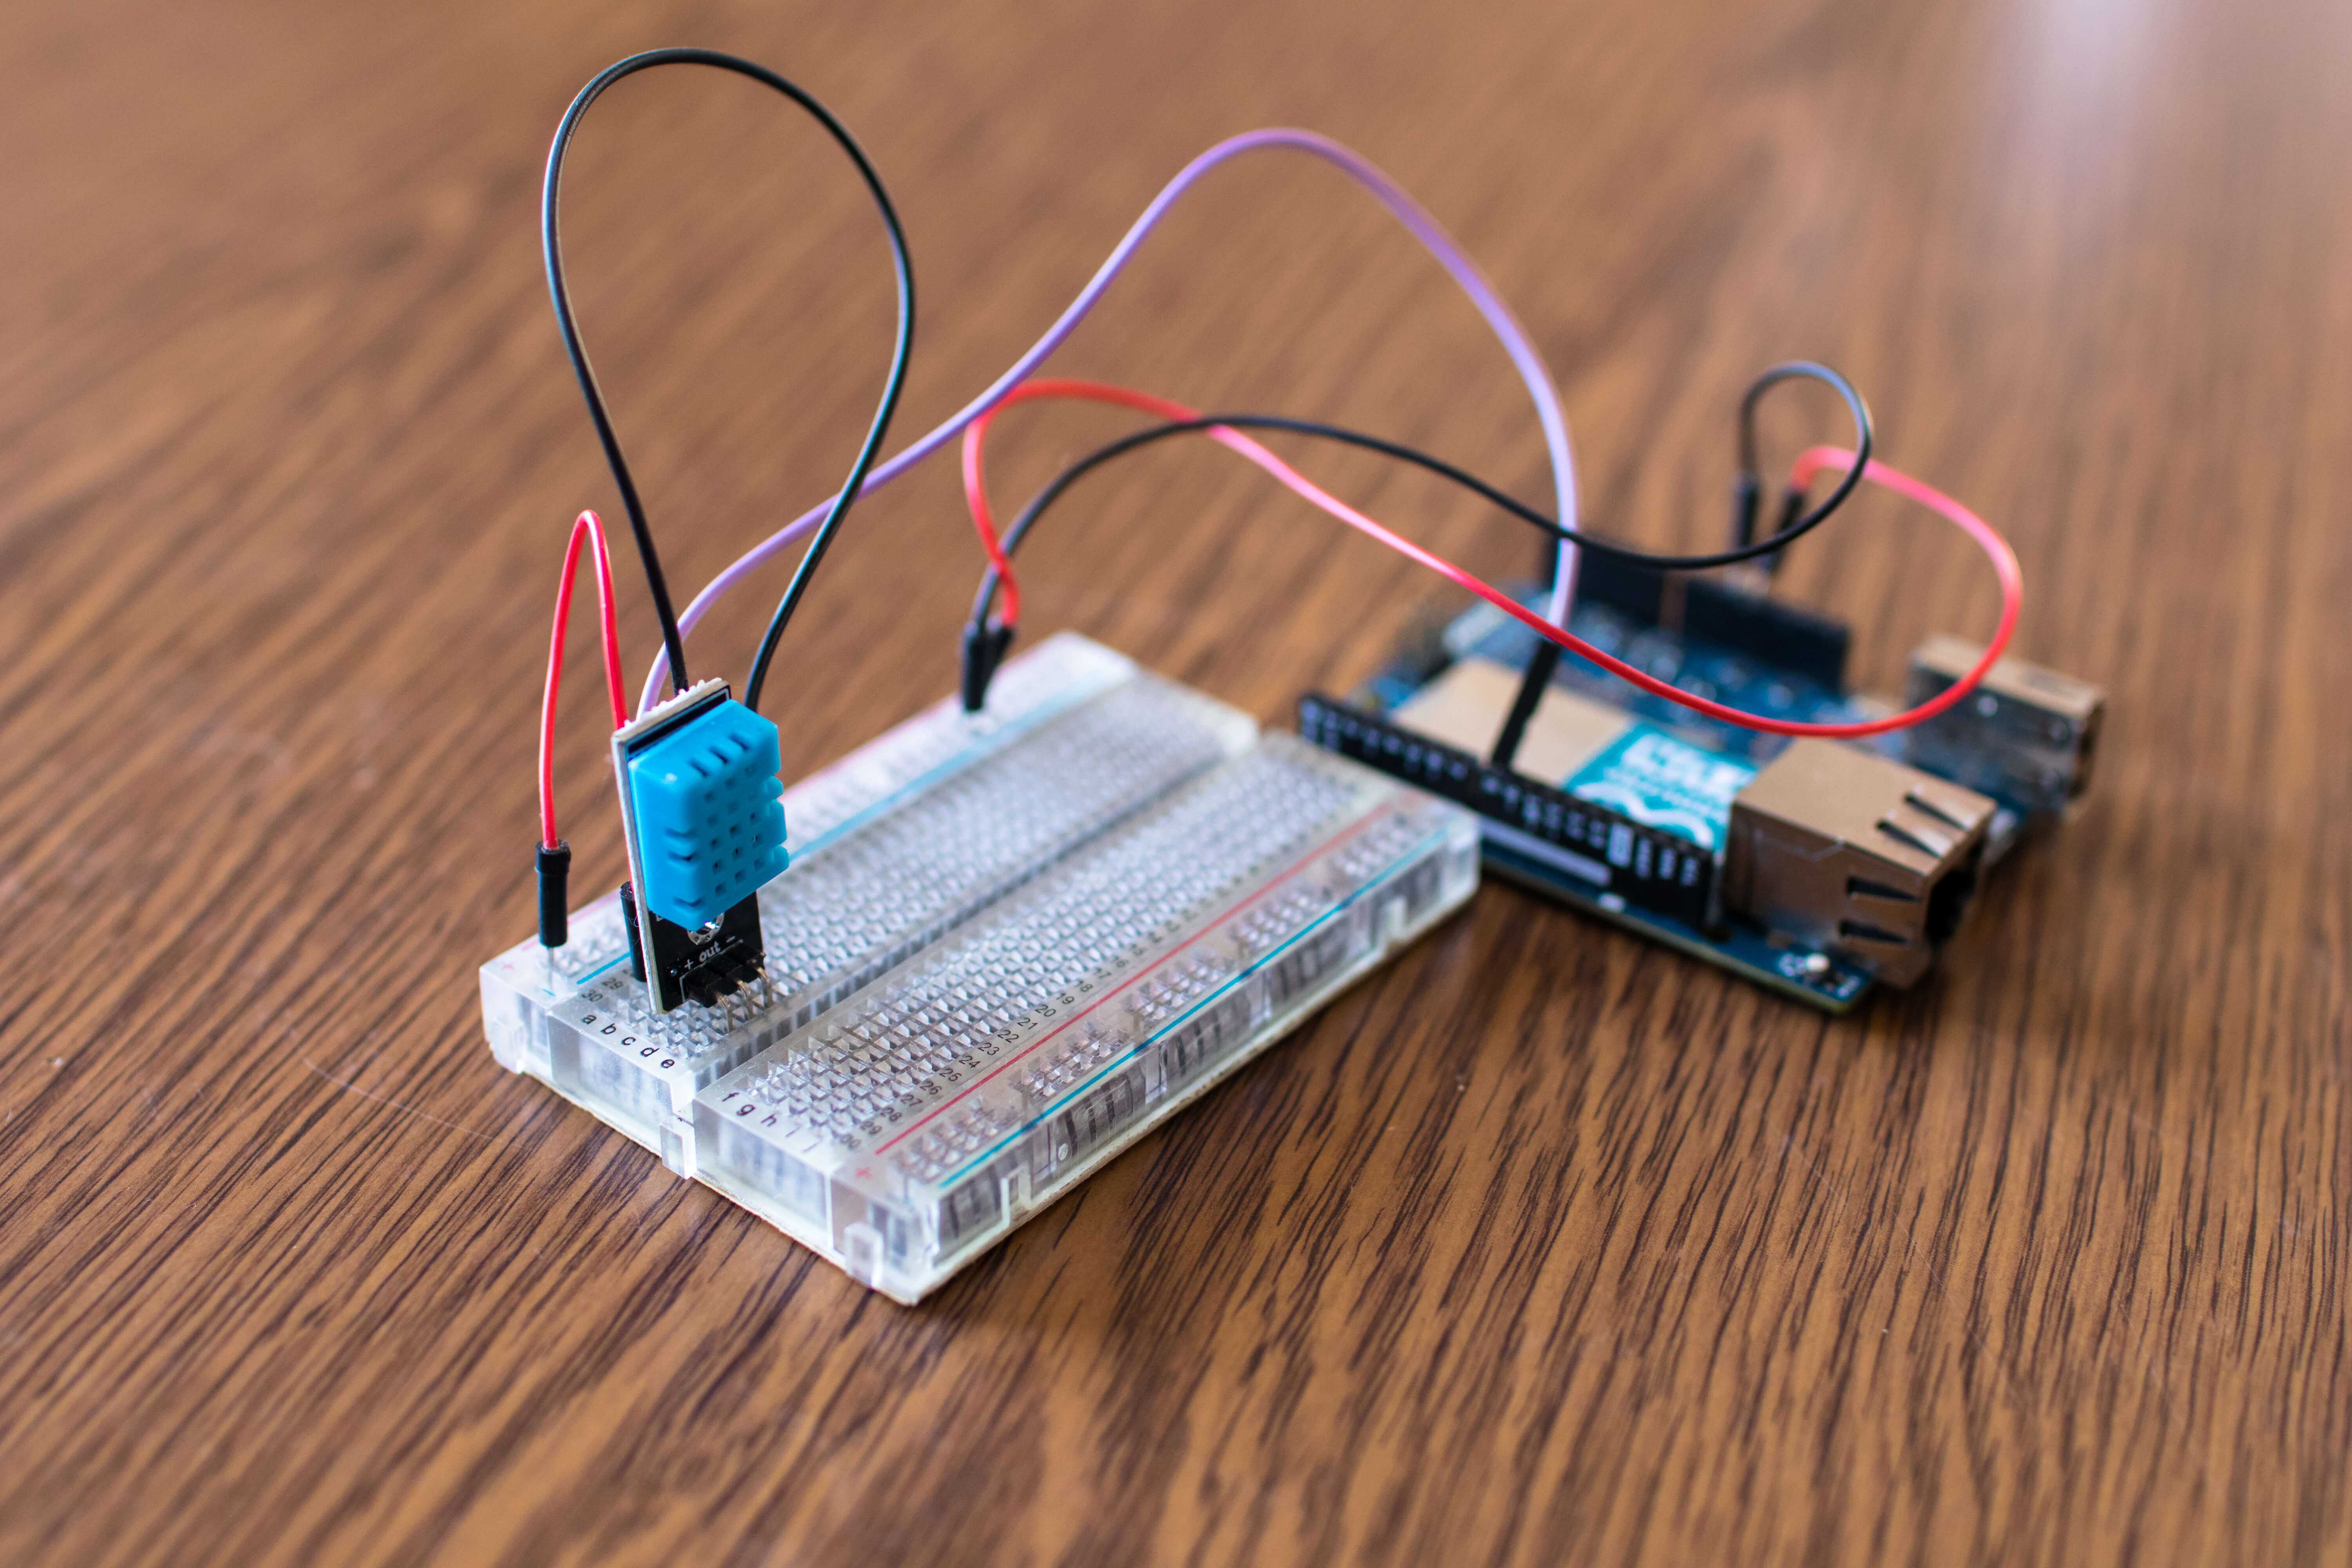 Humidity and temperature sensor prototype at school for IoT device